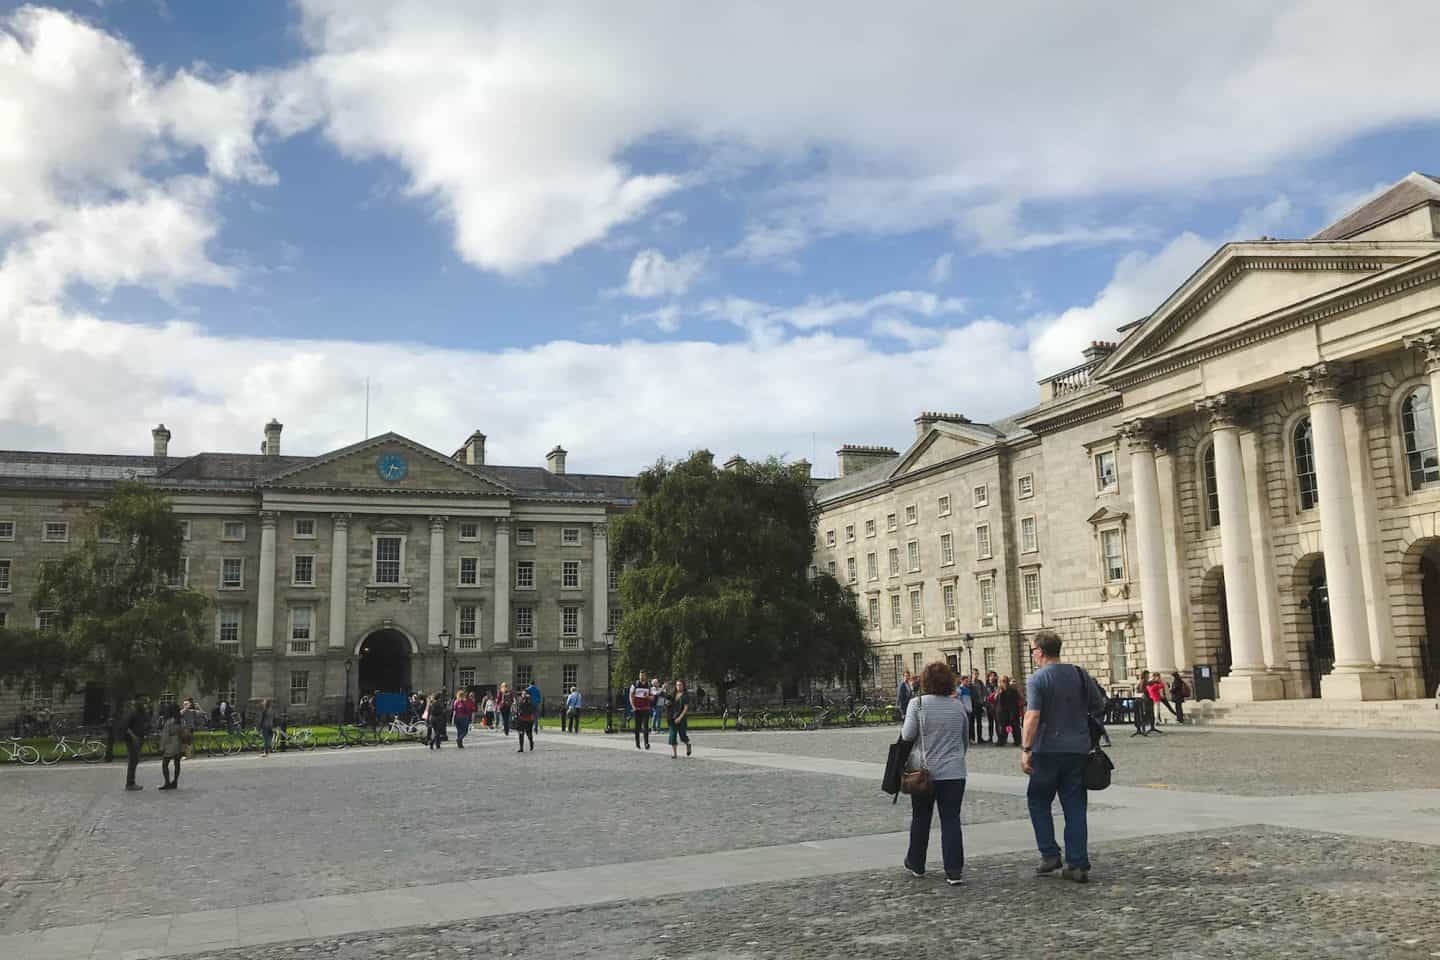 Many people visit the Trinity College Library to see the Book of Kells in Ireland